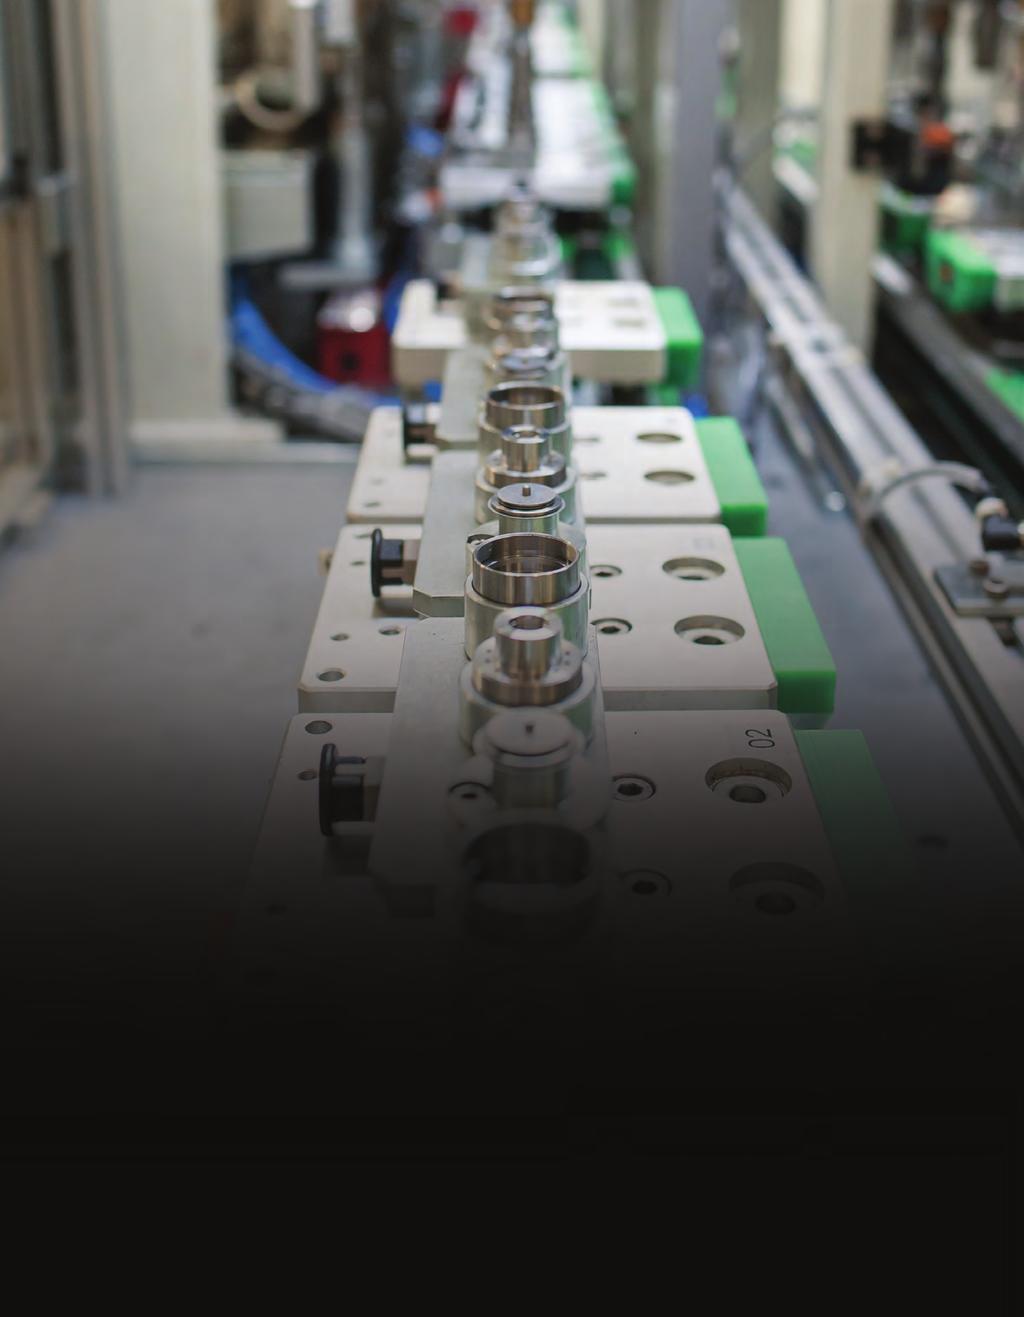 INNOVATION KONI invests heavily in innovation. It is one of our core qualities required to continue to produce highly qualified shock absorbers.